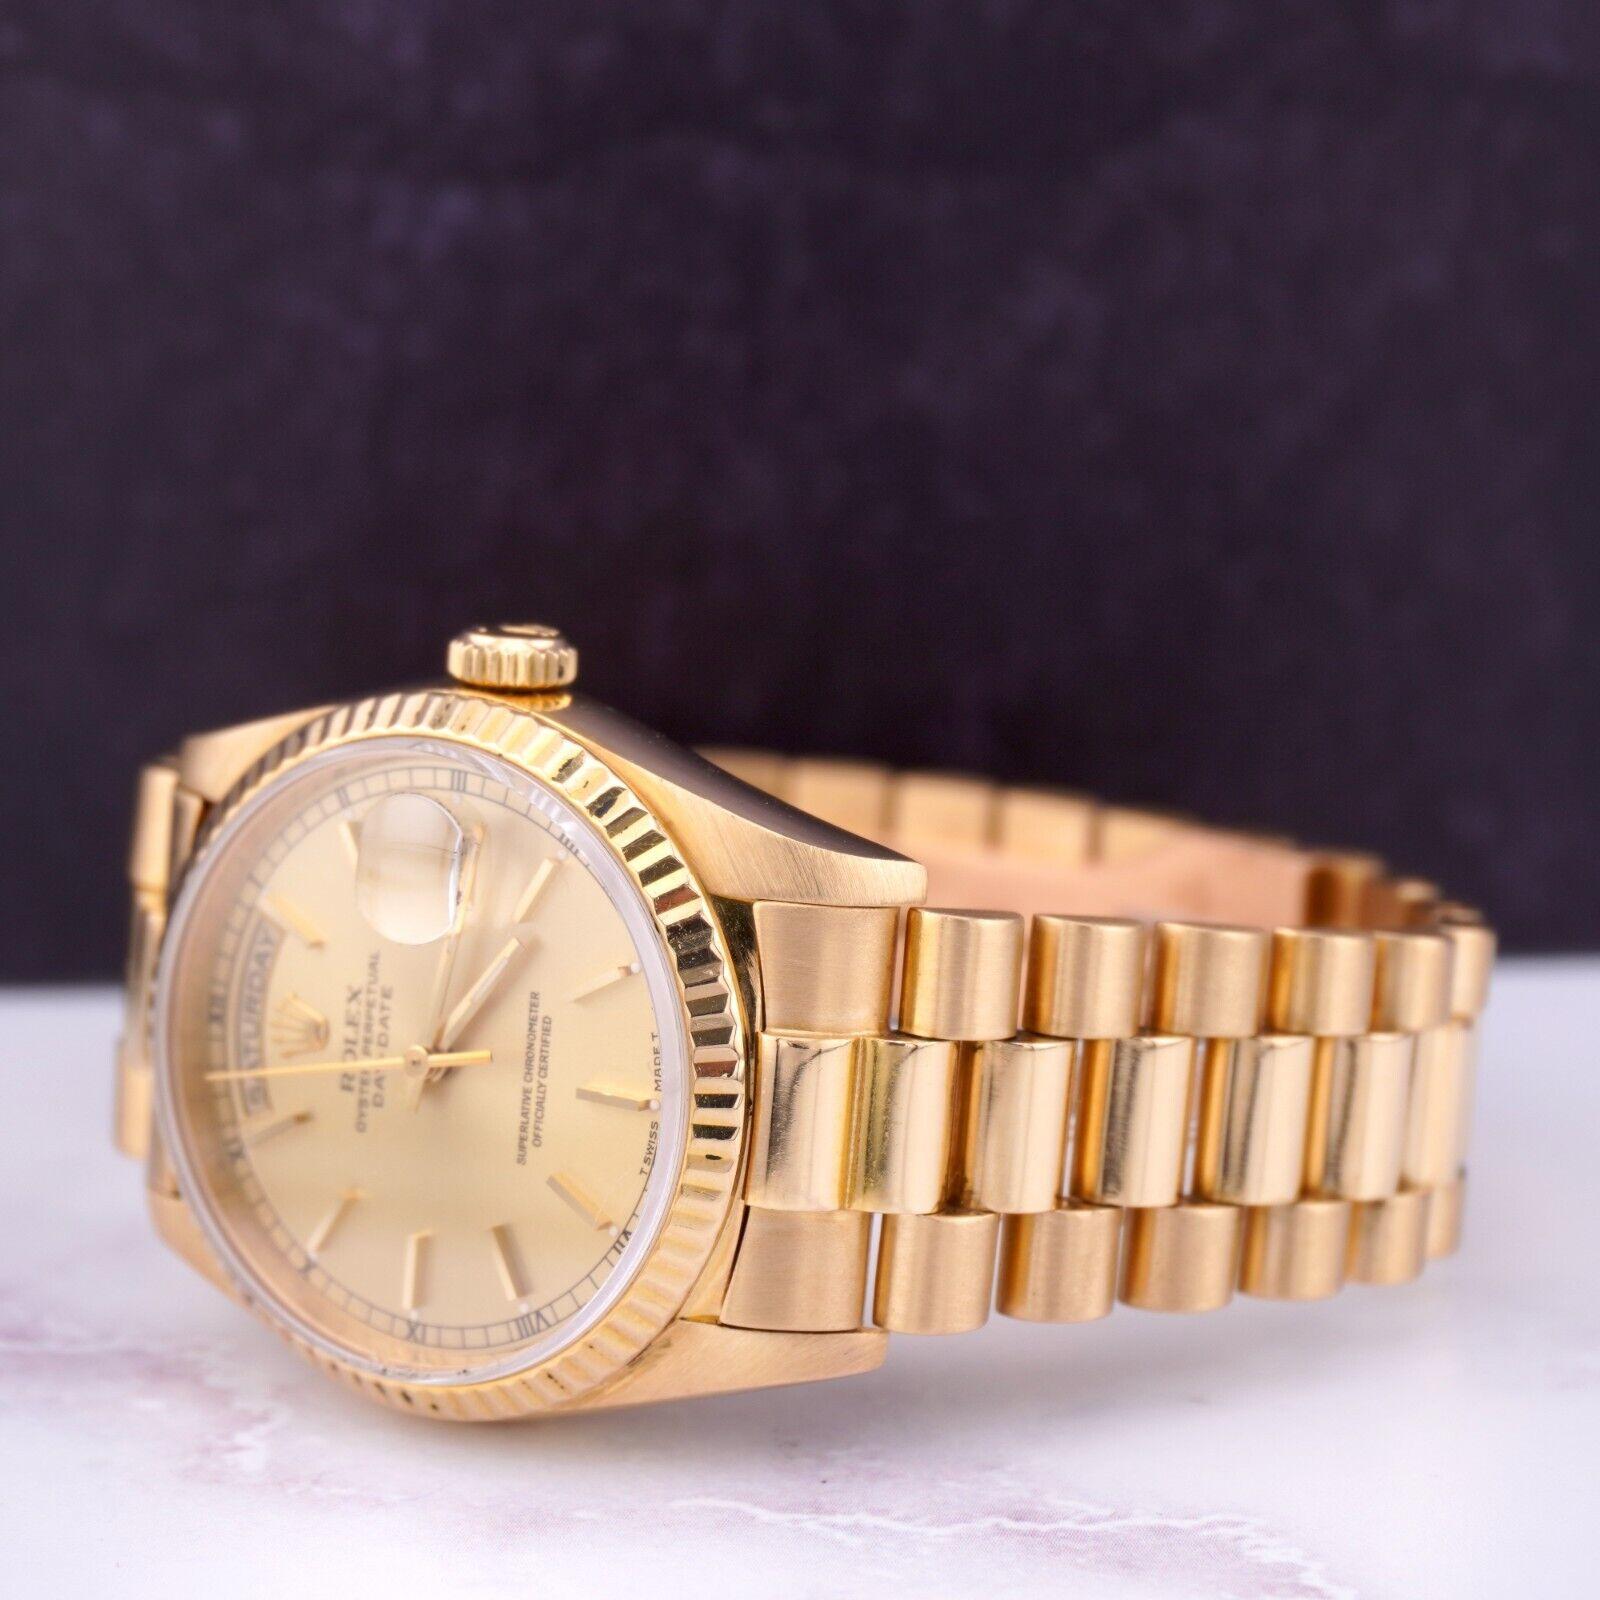 Women's or Men's Rolex DAY-DATE 36mm 18K Yellow Gold President Men's Gold Dial Watch Ref: 18238 For Sale